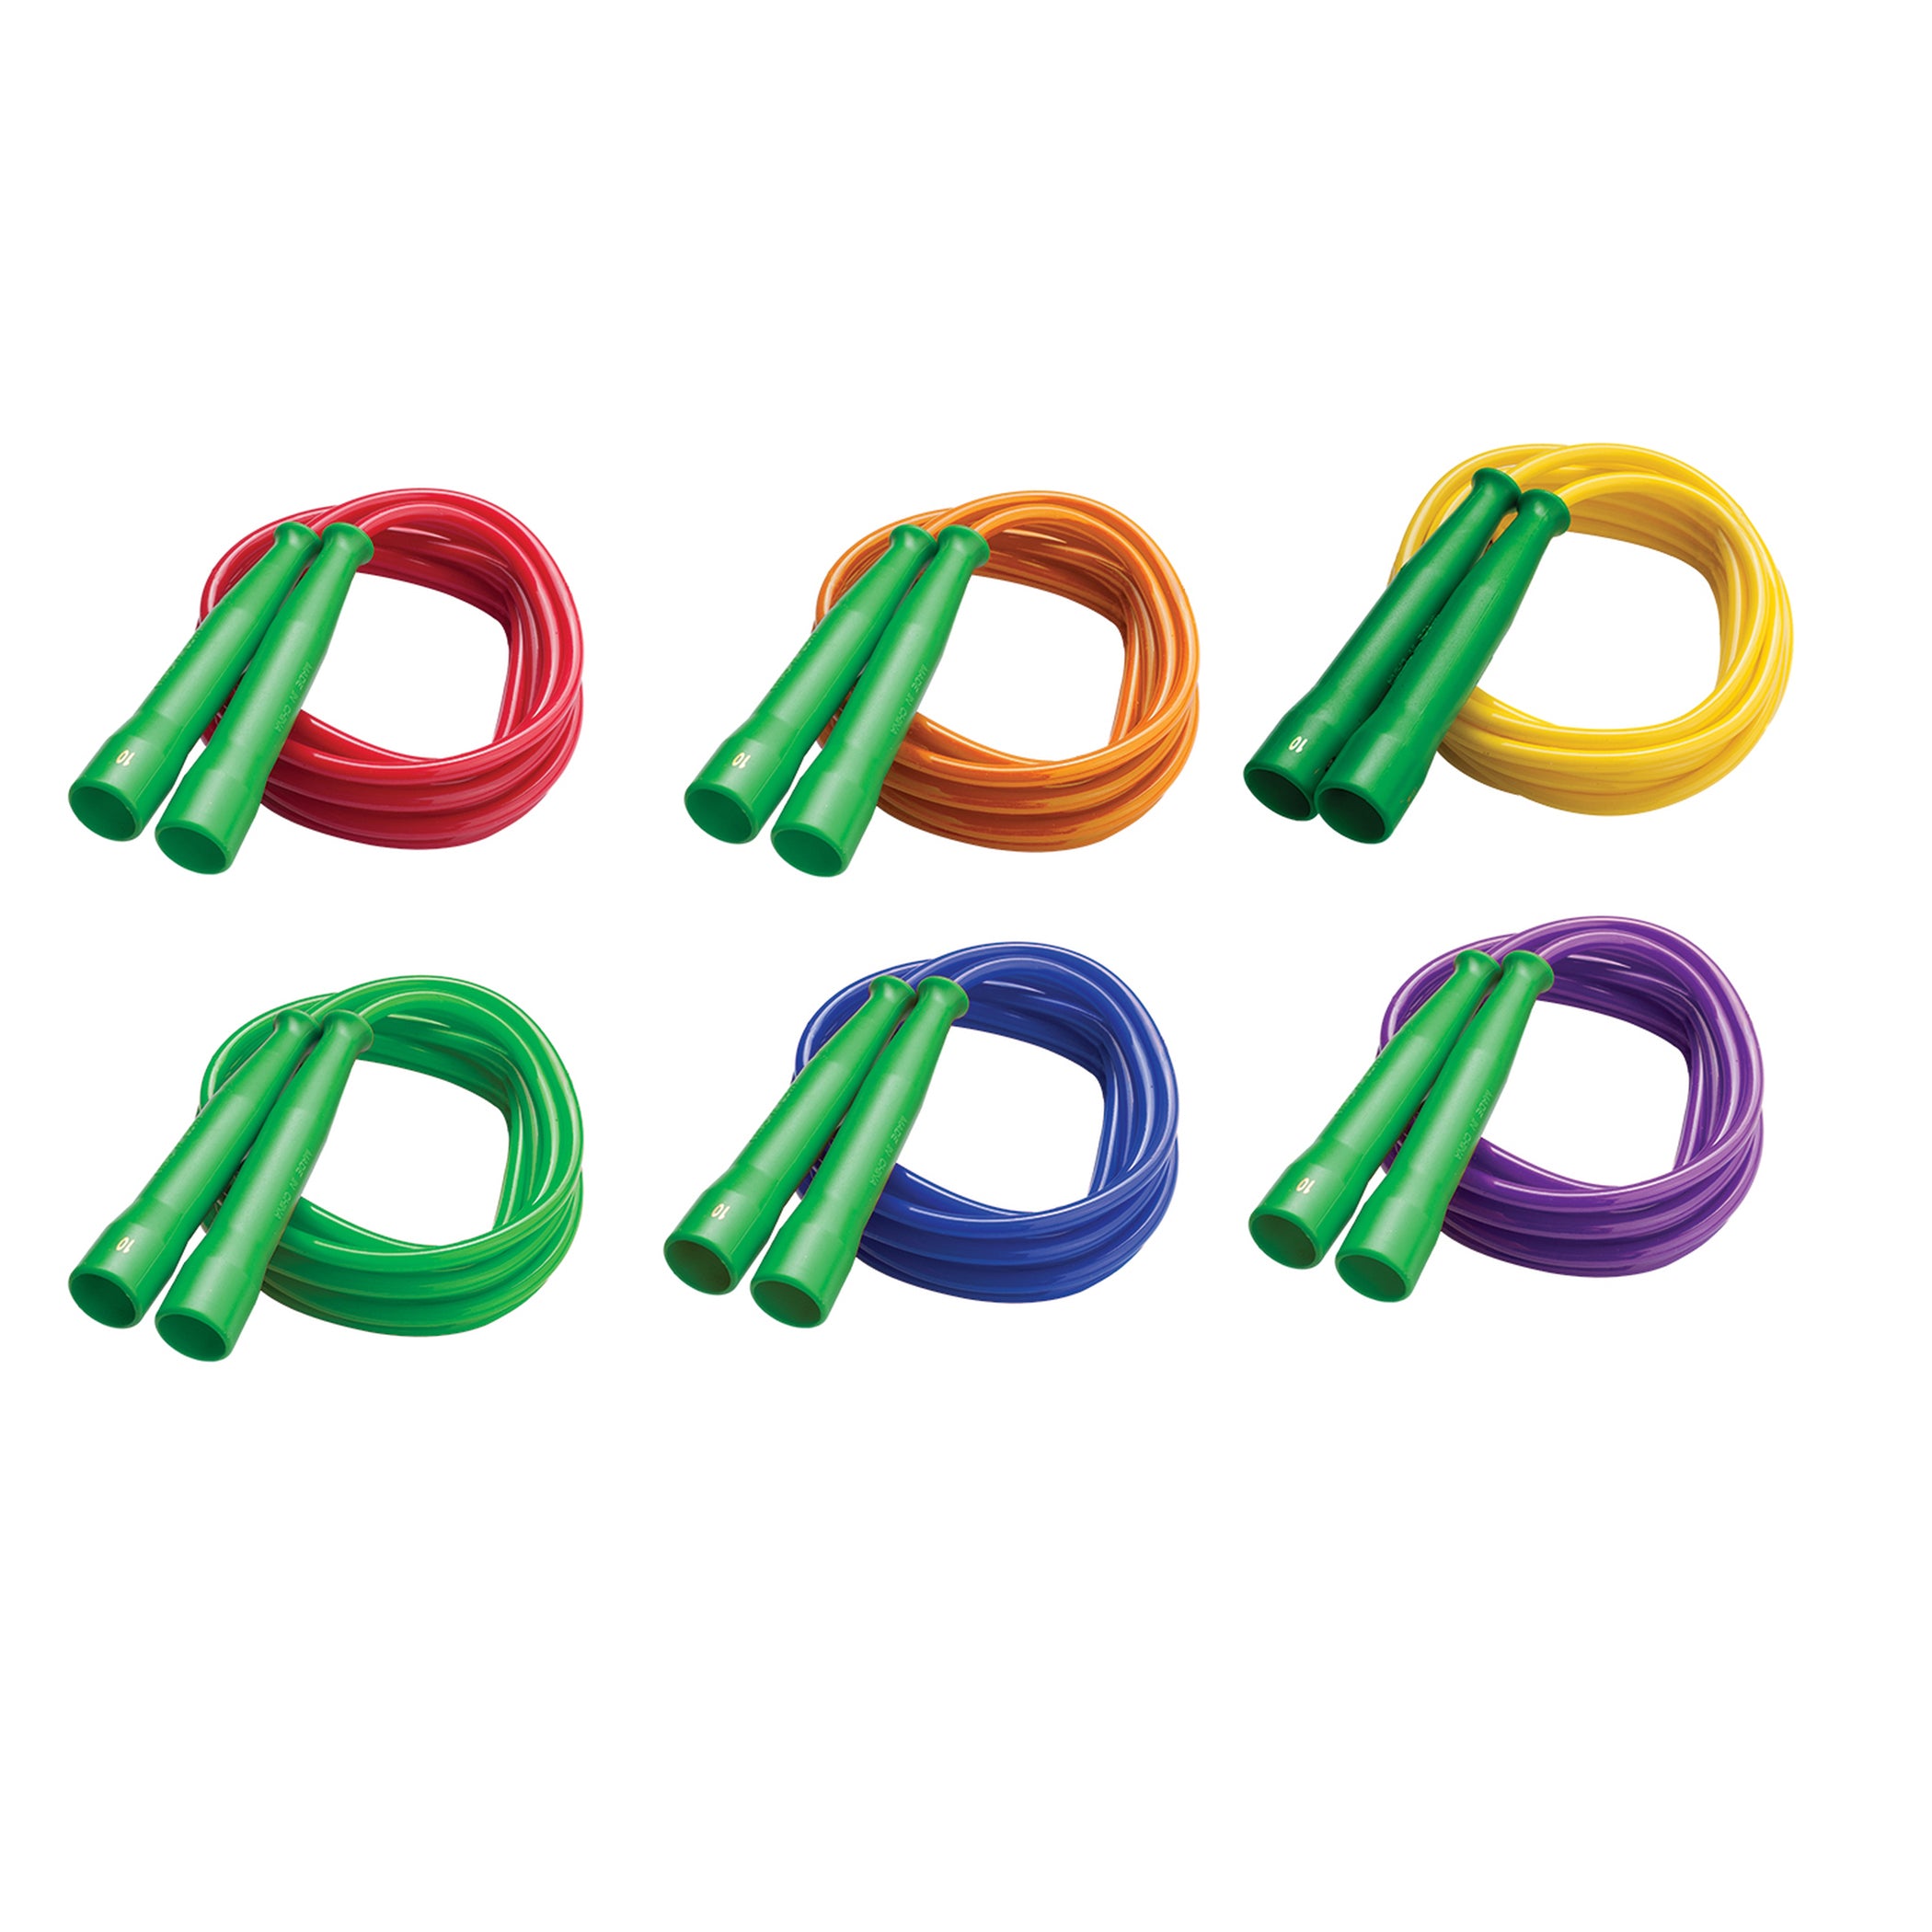 Licorice Speed Jump Rope, 10' with Green Handles, Pack of 6 - A1 School Supplies